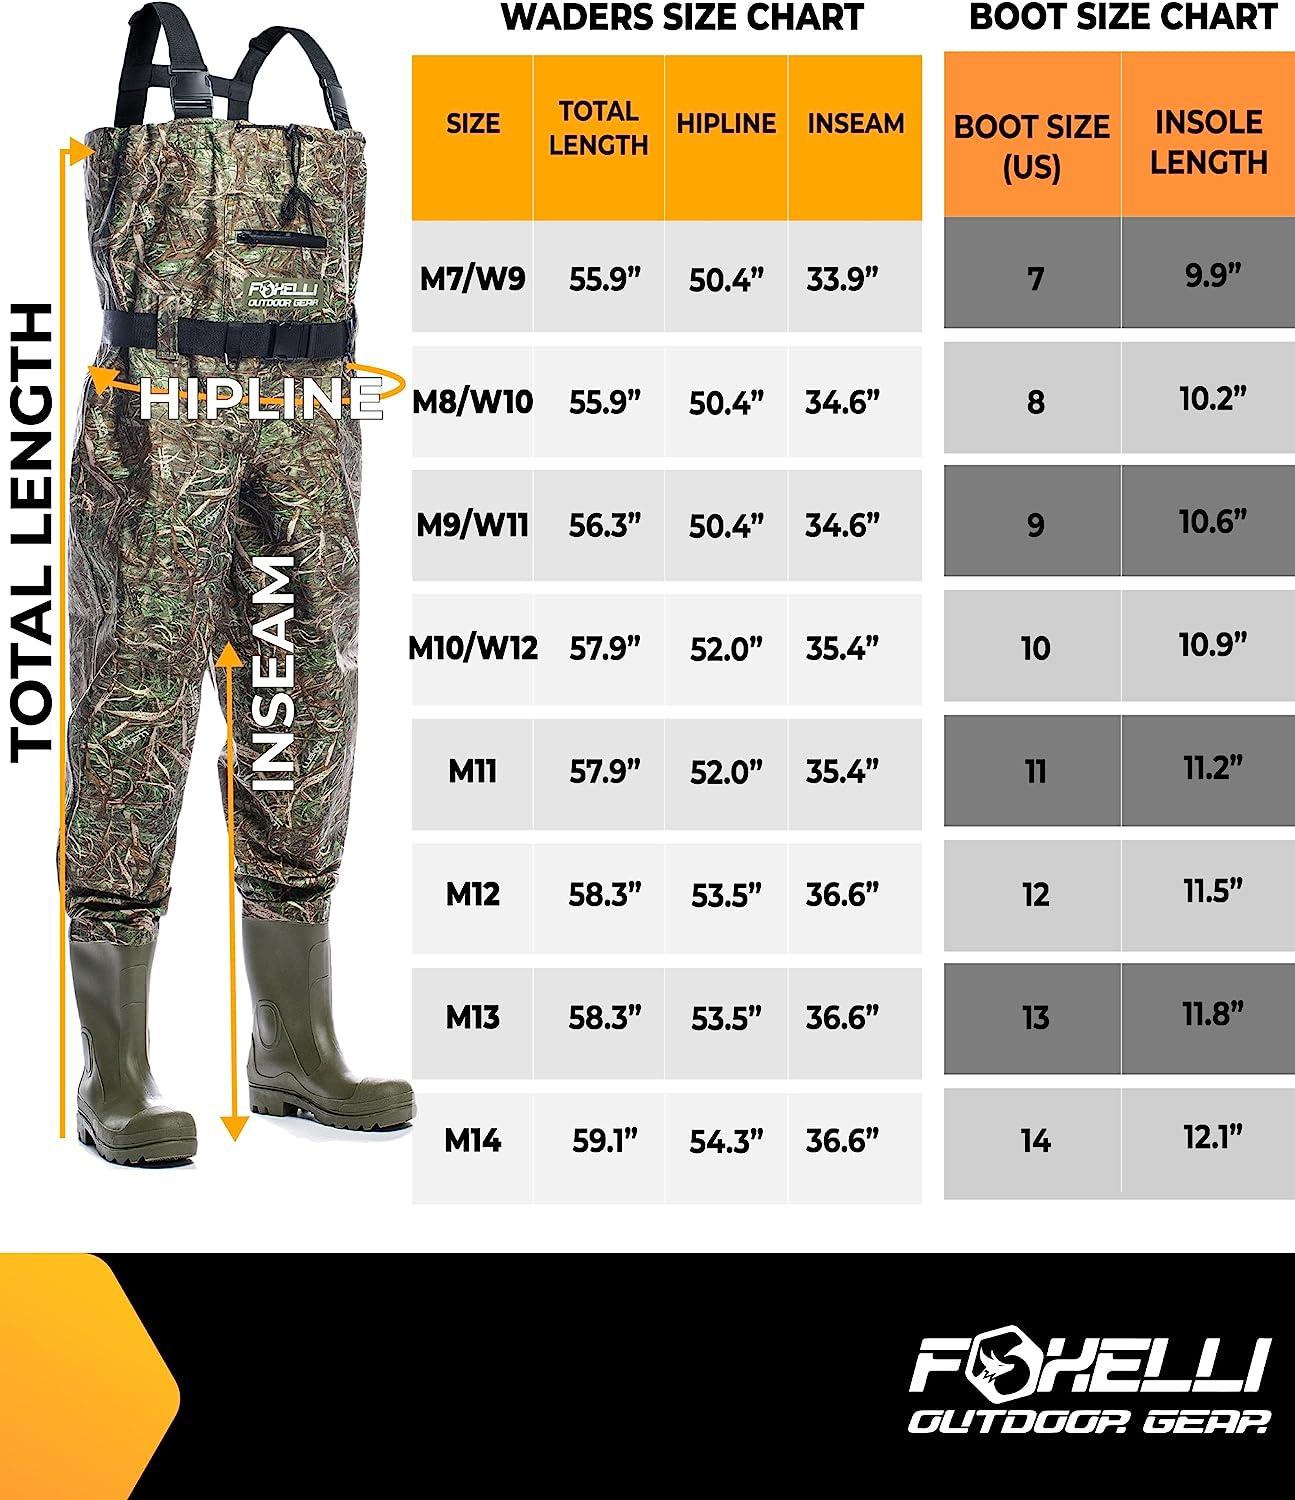 Foxelli Chest Waders Camo Hunting Fishing Waders for Men and Women with  Boots, 2-ply Nylon/PVC Waterproof Bootfoot Waders 11 Camo